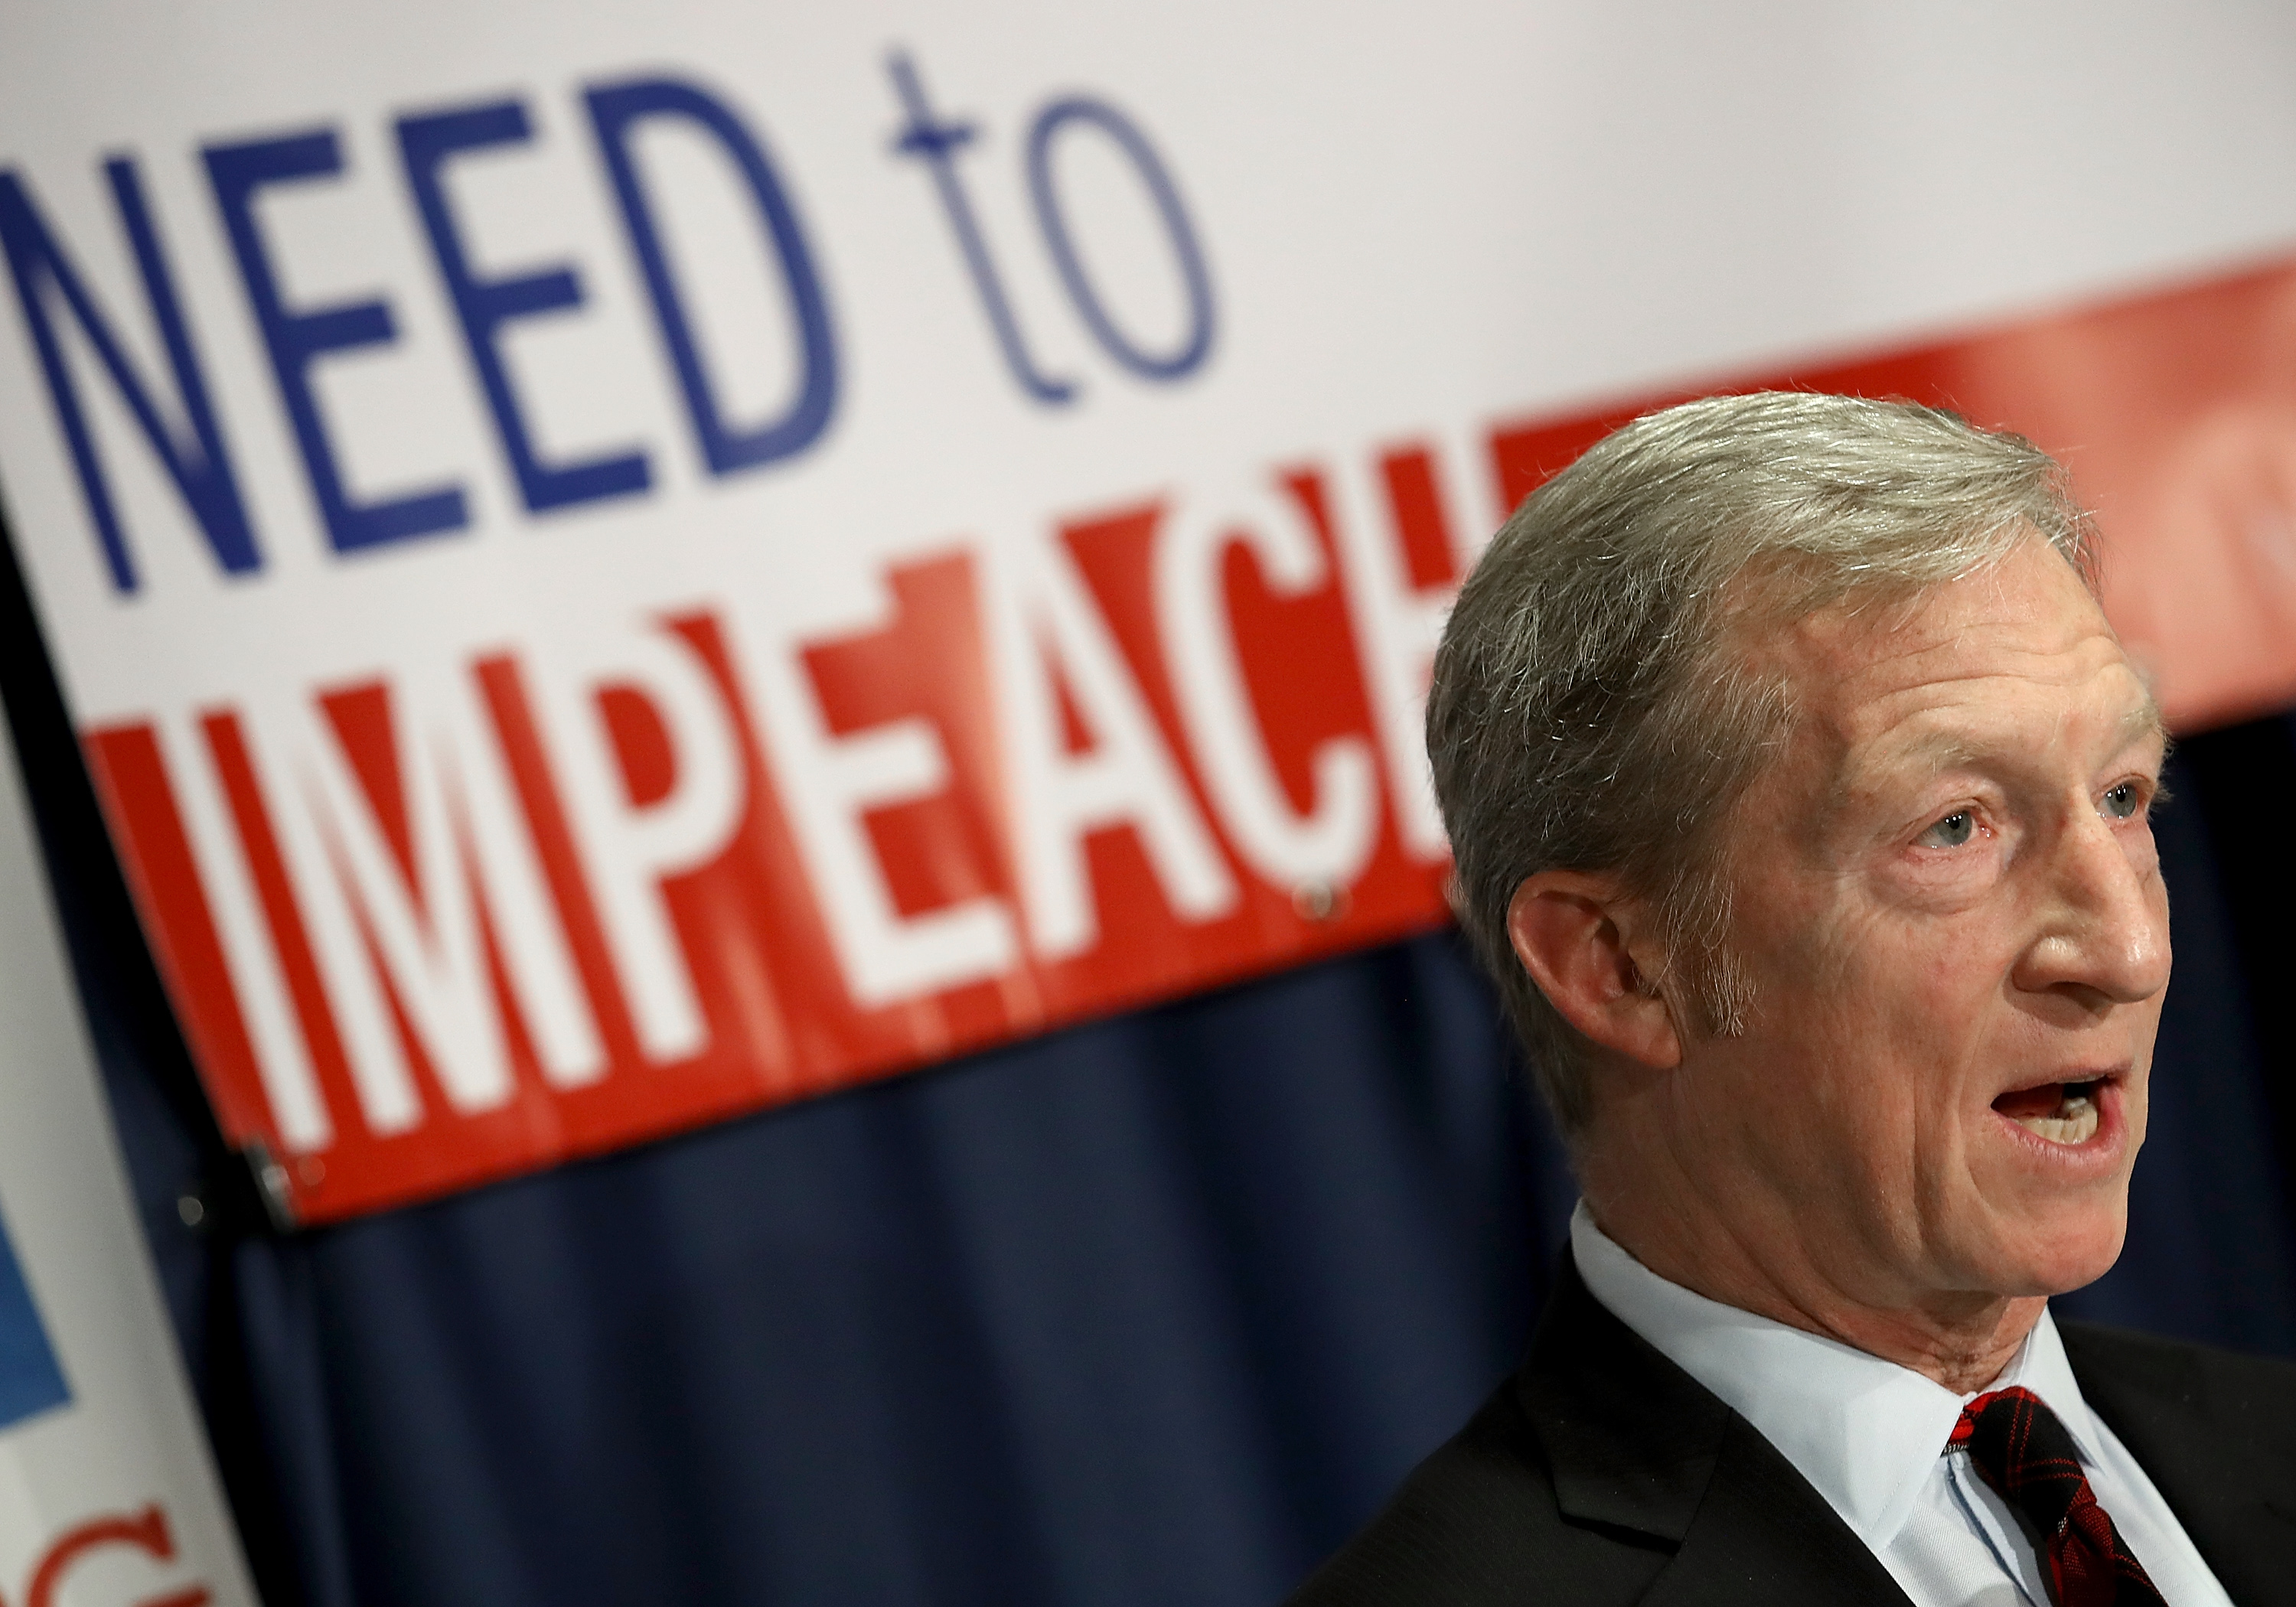 Billionaire hedge fund manager and philanthropist Tom Steyer speaks during a press conference at the National Press Club December 6, 2017 in Washington, DC. Steyer, founder of the 